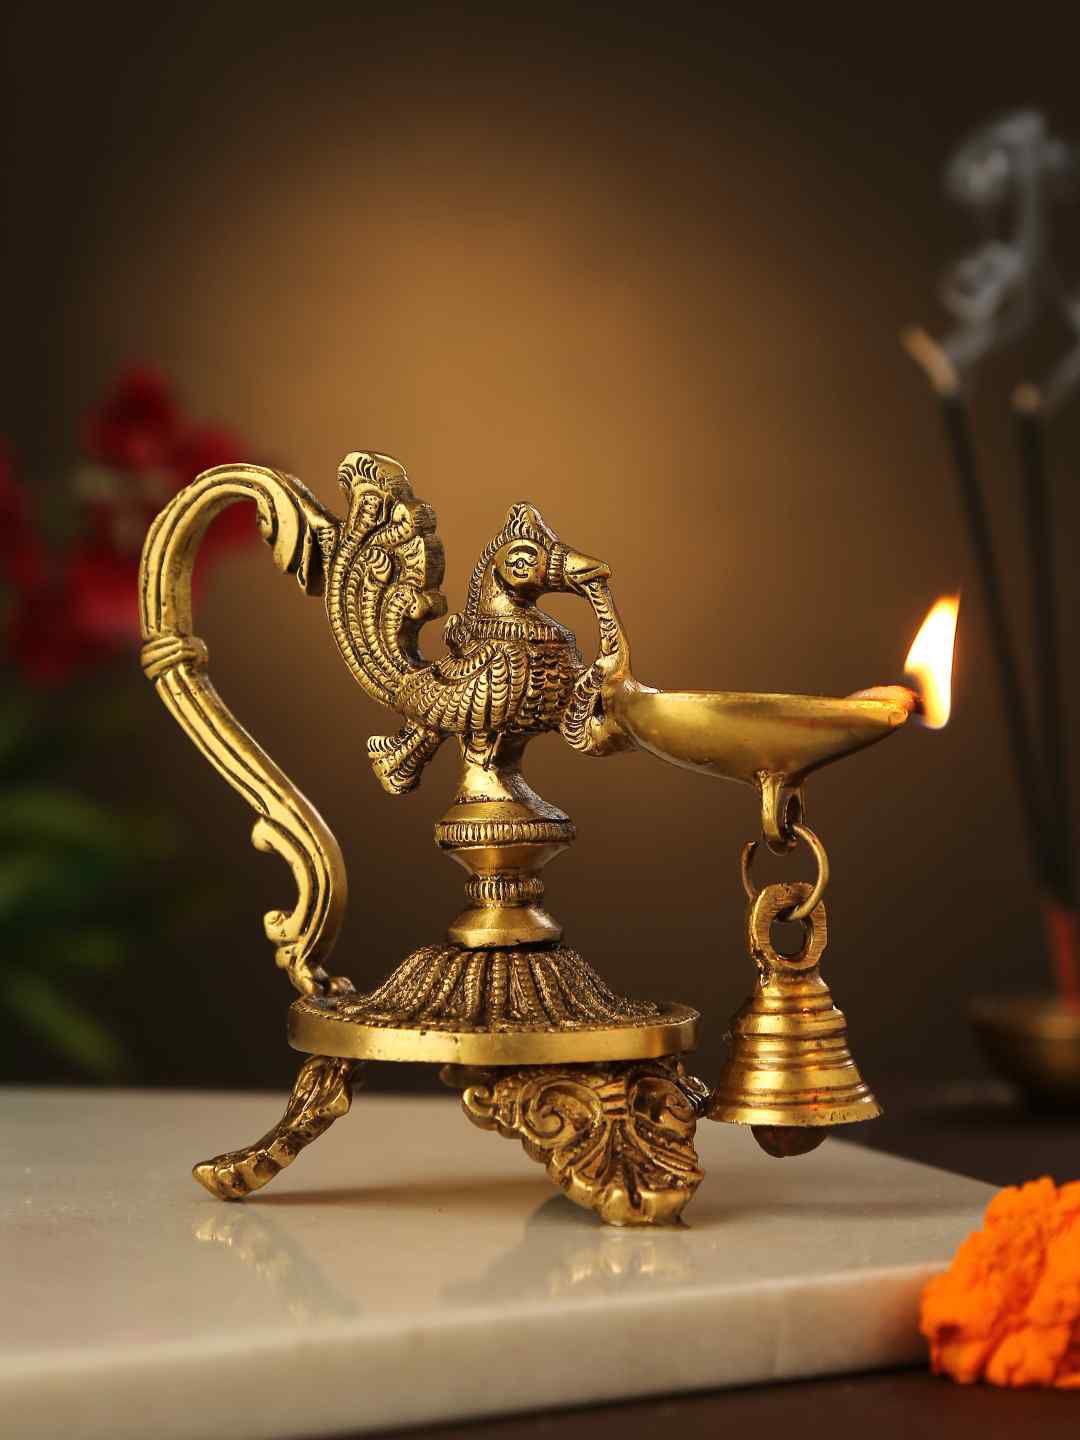 Amoliconcepts Gold-Toned Peacock Shaped Lamp Diya with Bell Pooja Essentials Price in India